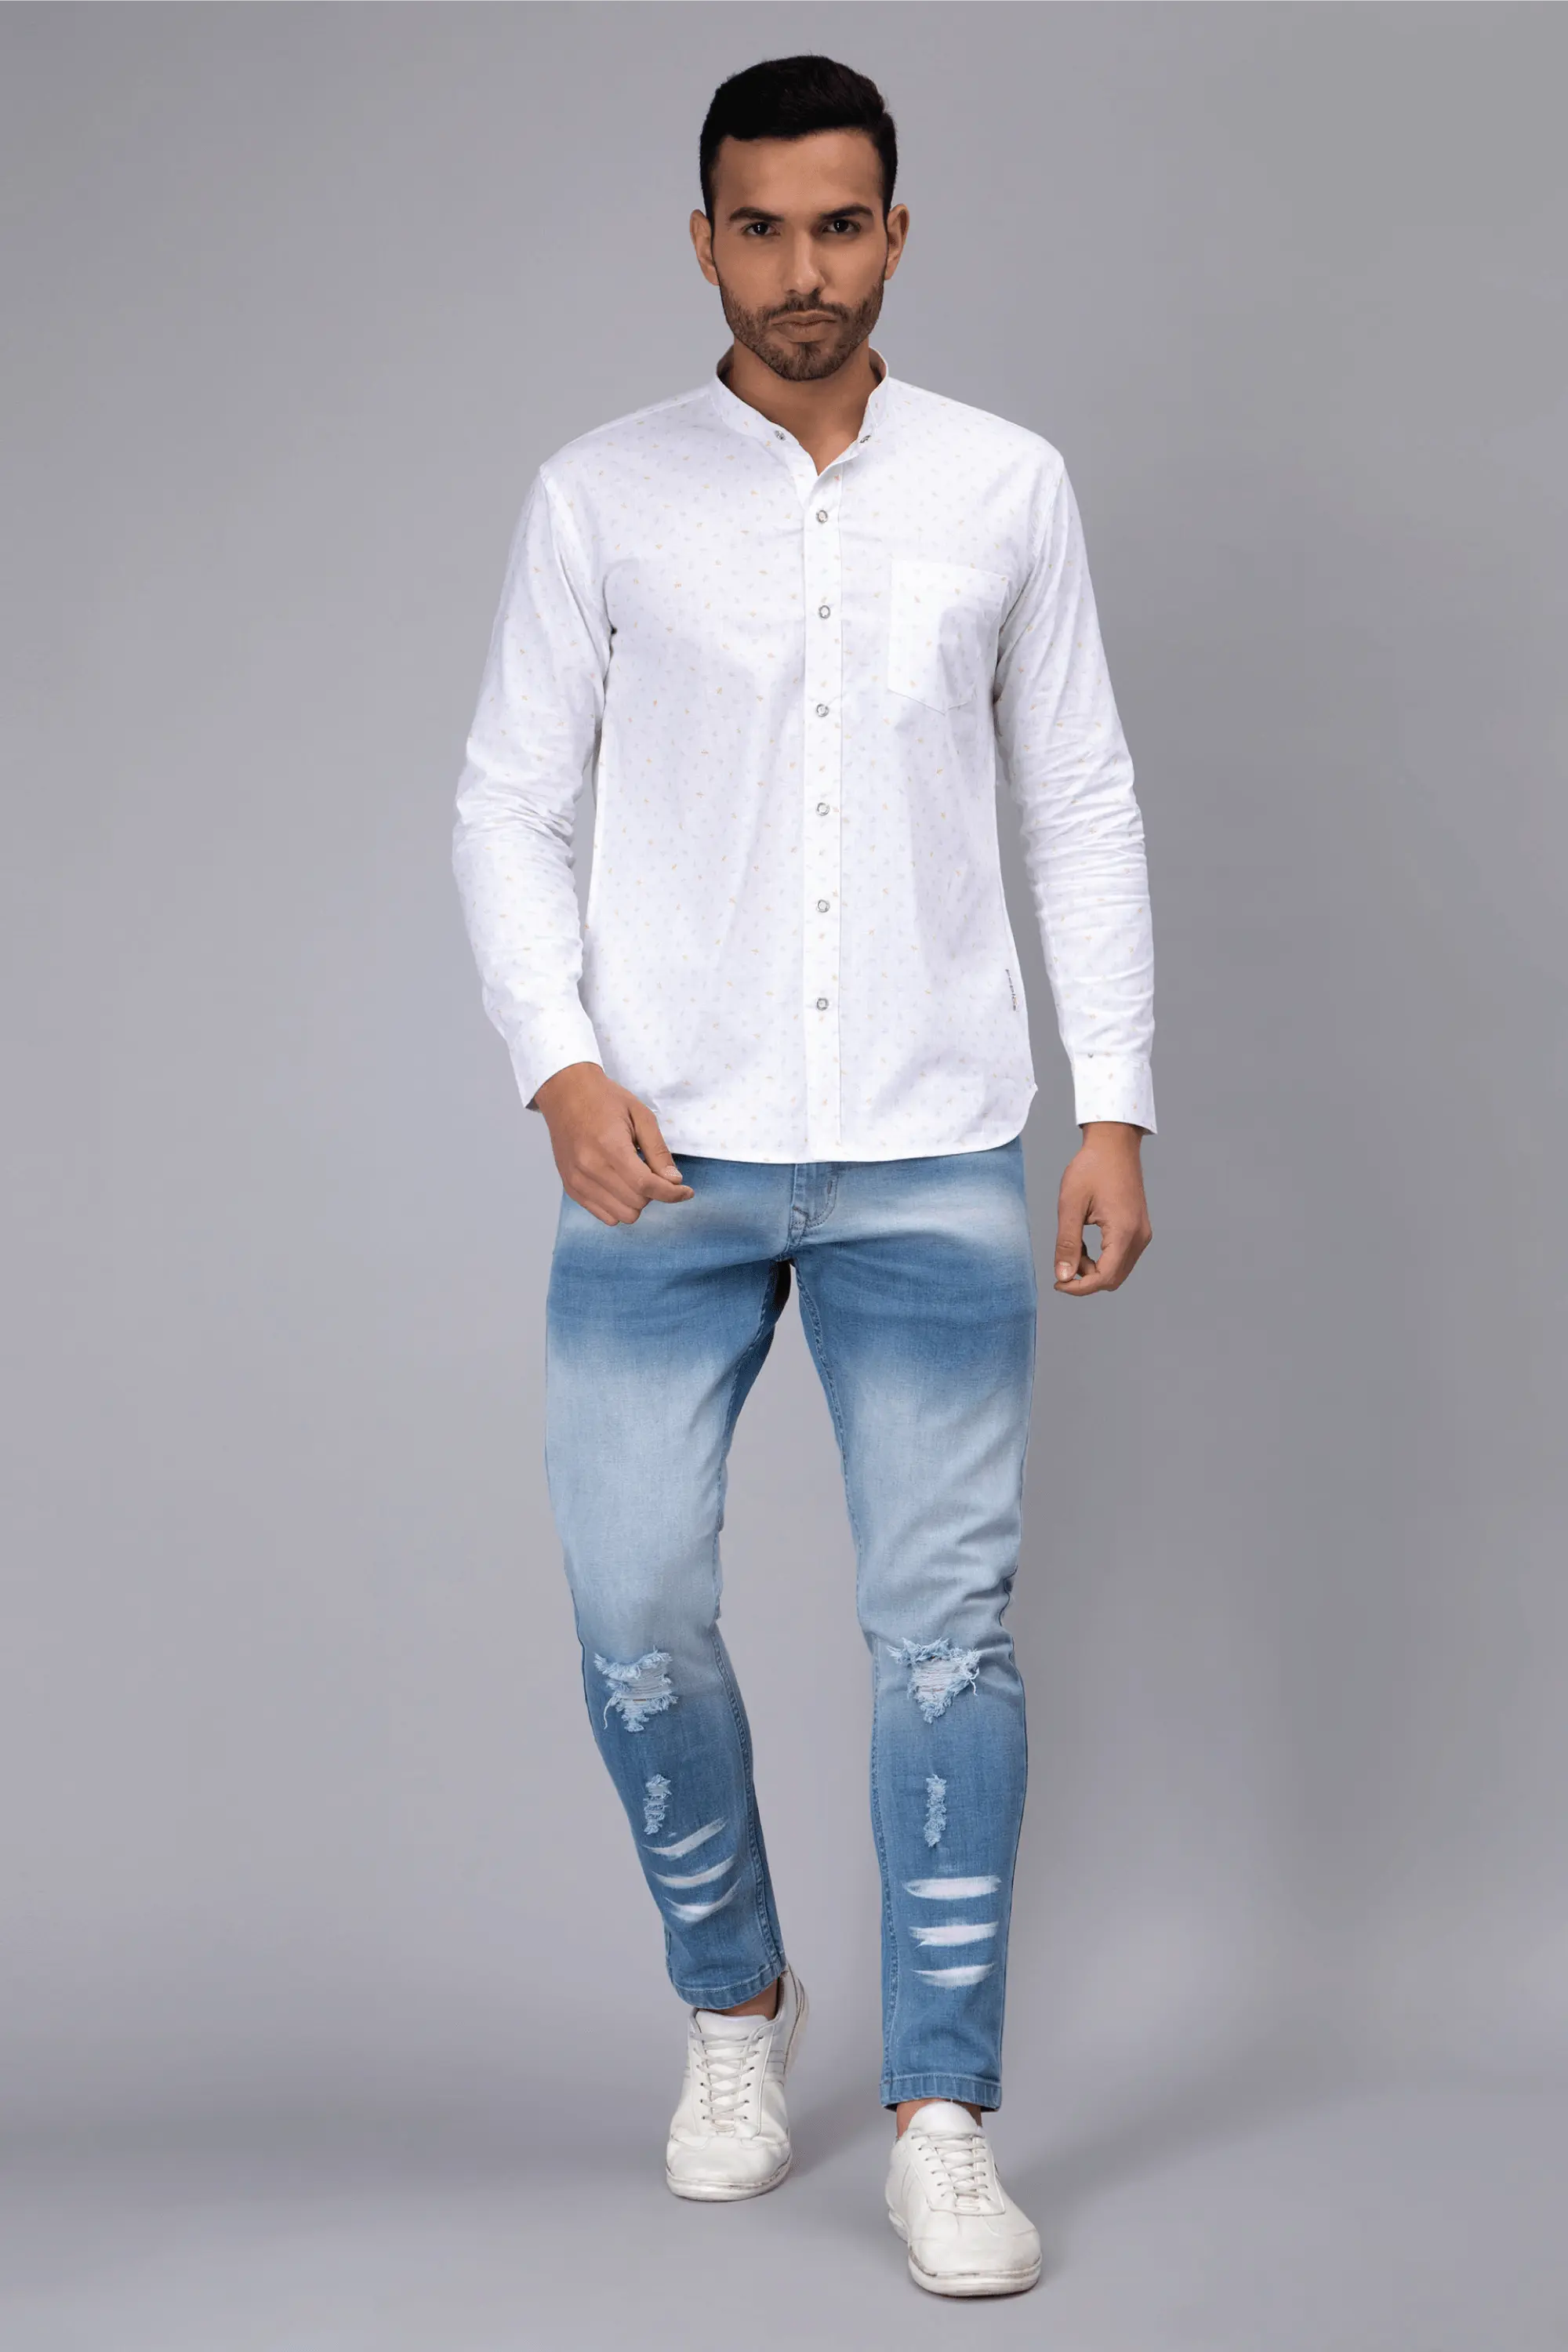 Pepe Jeans Men Solid Casual White Shirt - Buy Pepe Jeans Men Solid Casual White  Shirt Online at Best Prices in India | Flipkart.com